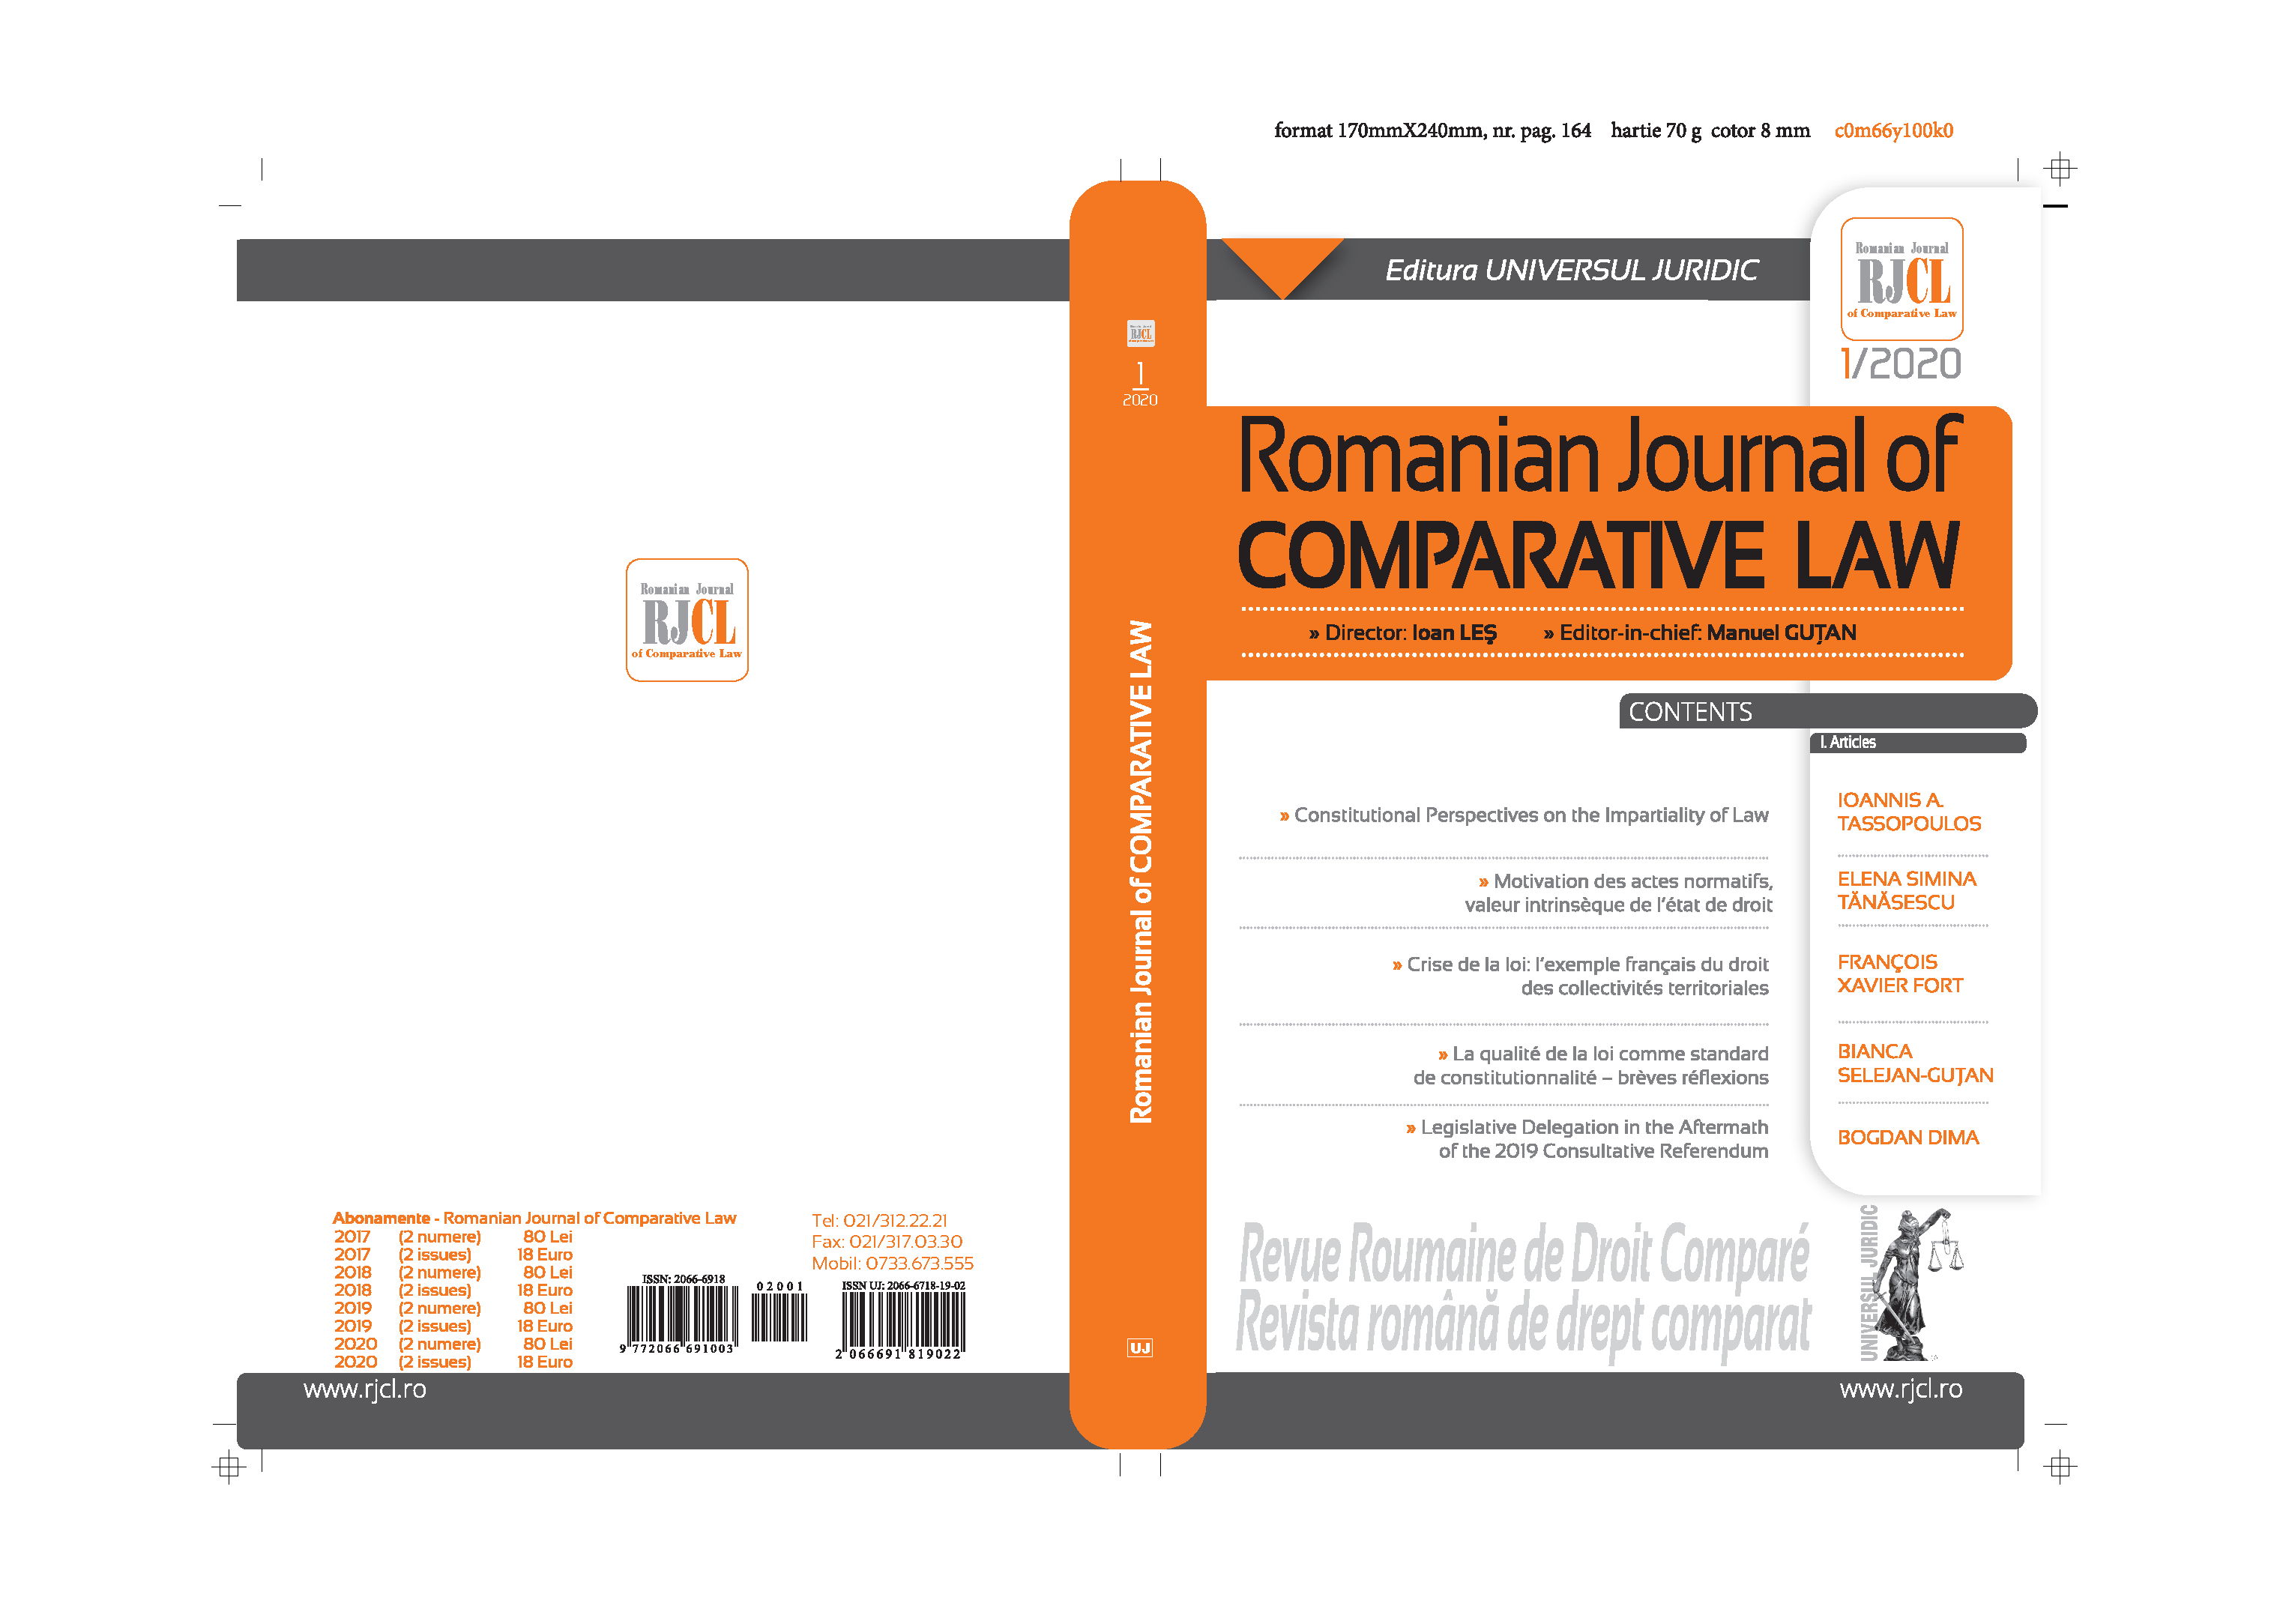 Motivation of normative acts, intrinsic value of the rule of law Cover Image